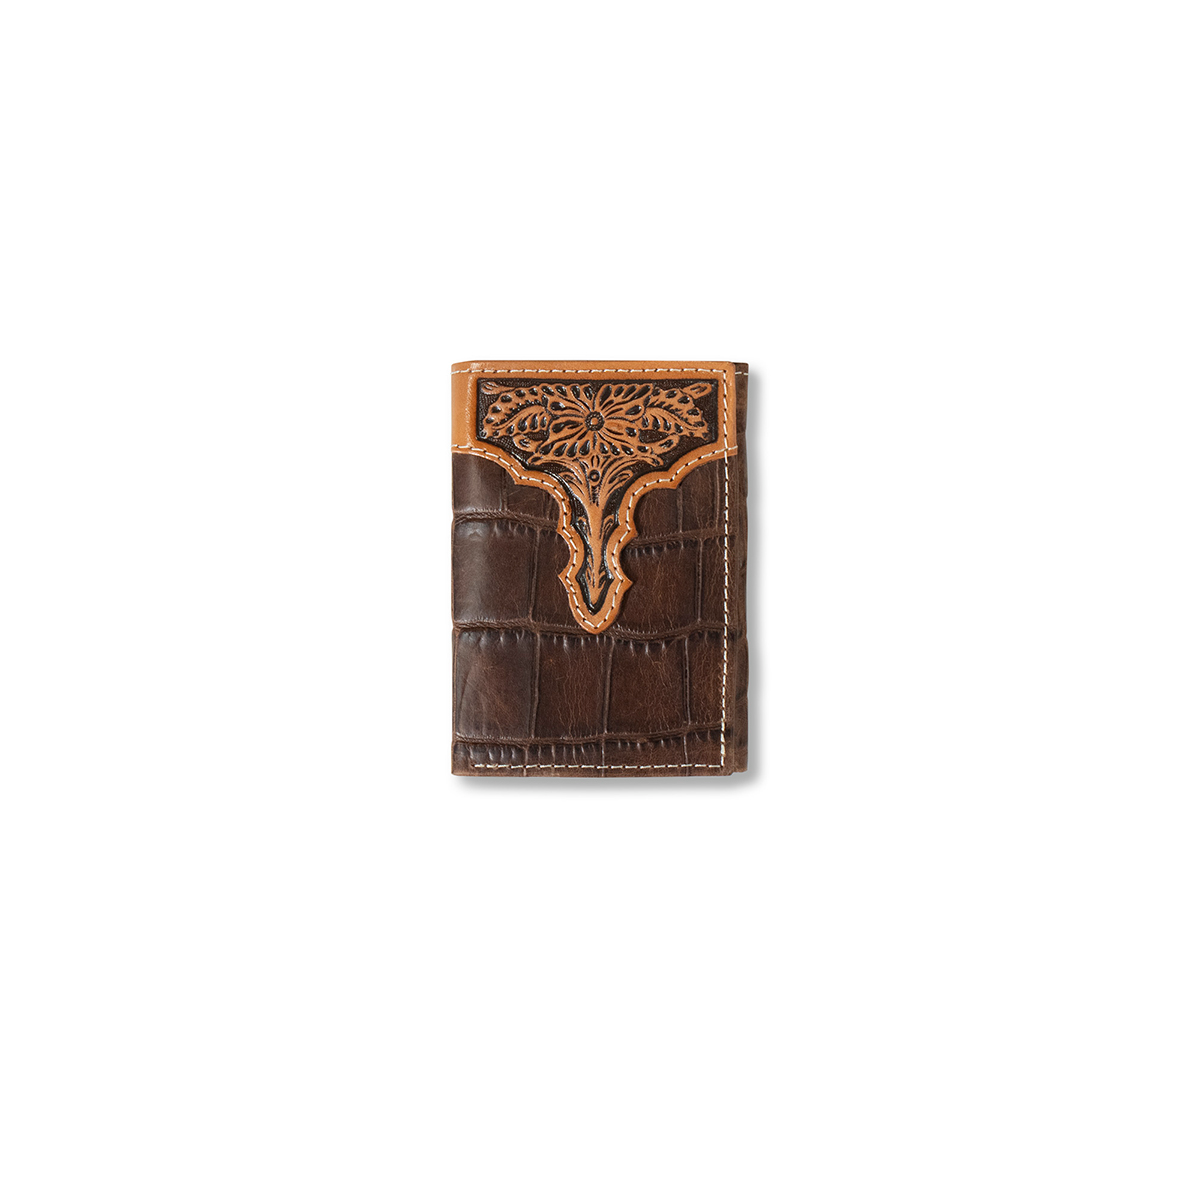 Ariat Trifold Wallet - Brown Crocodile Floral Embossed